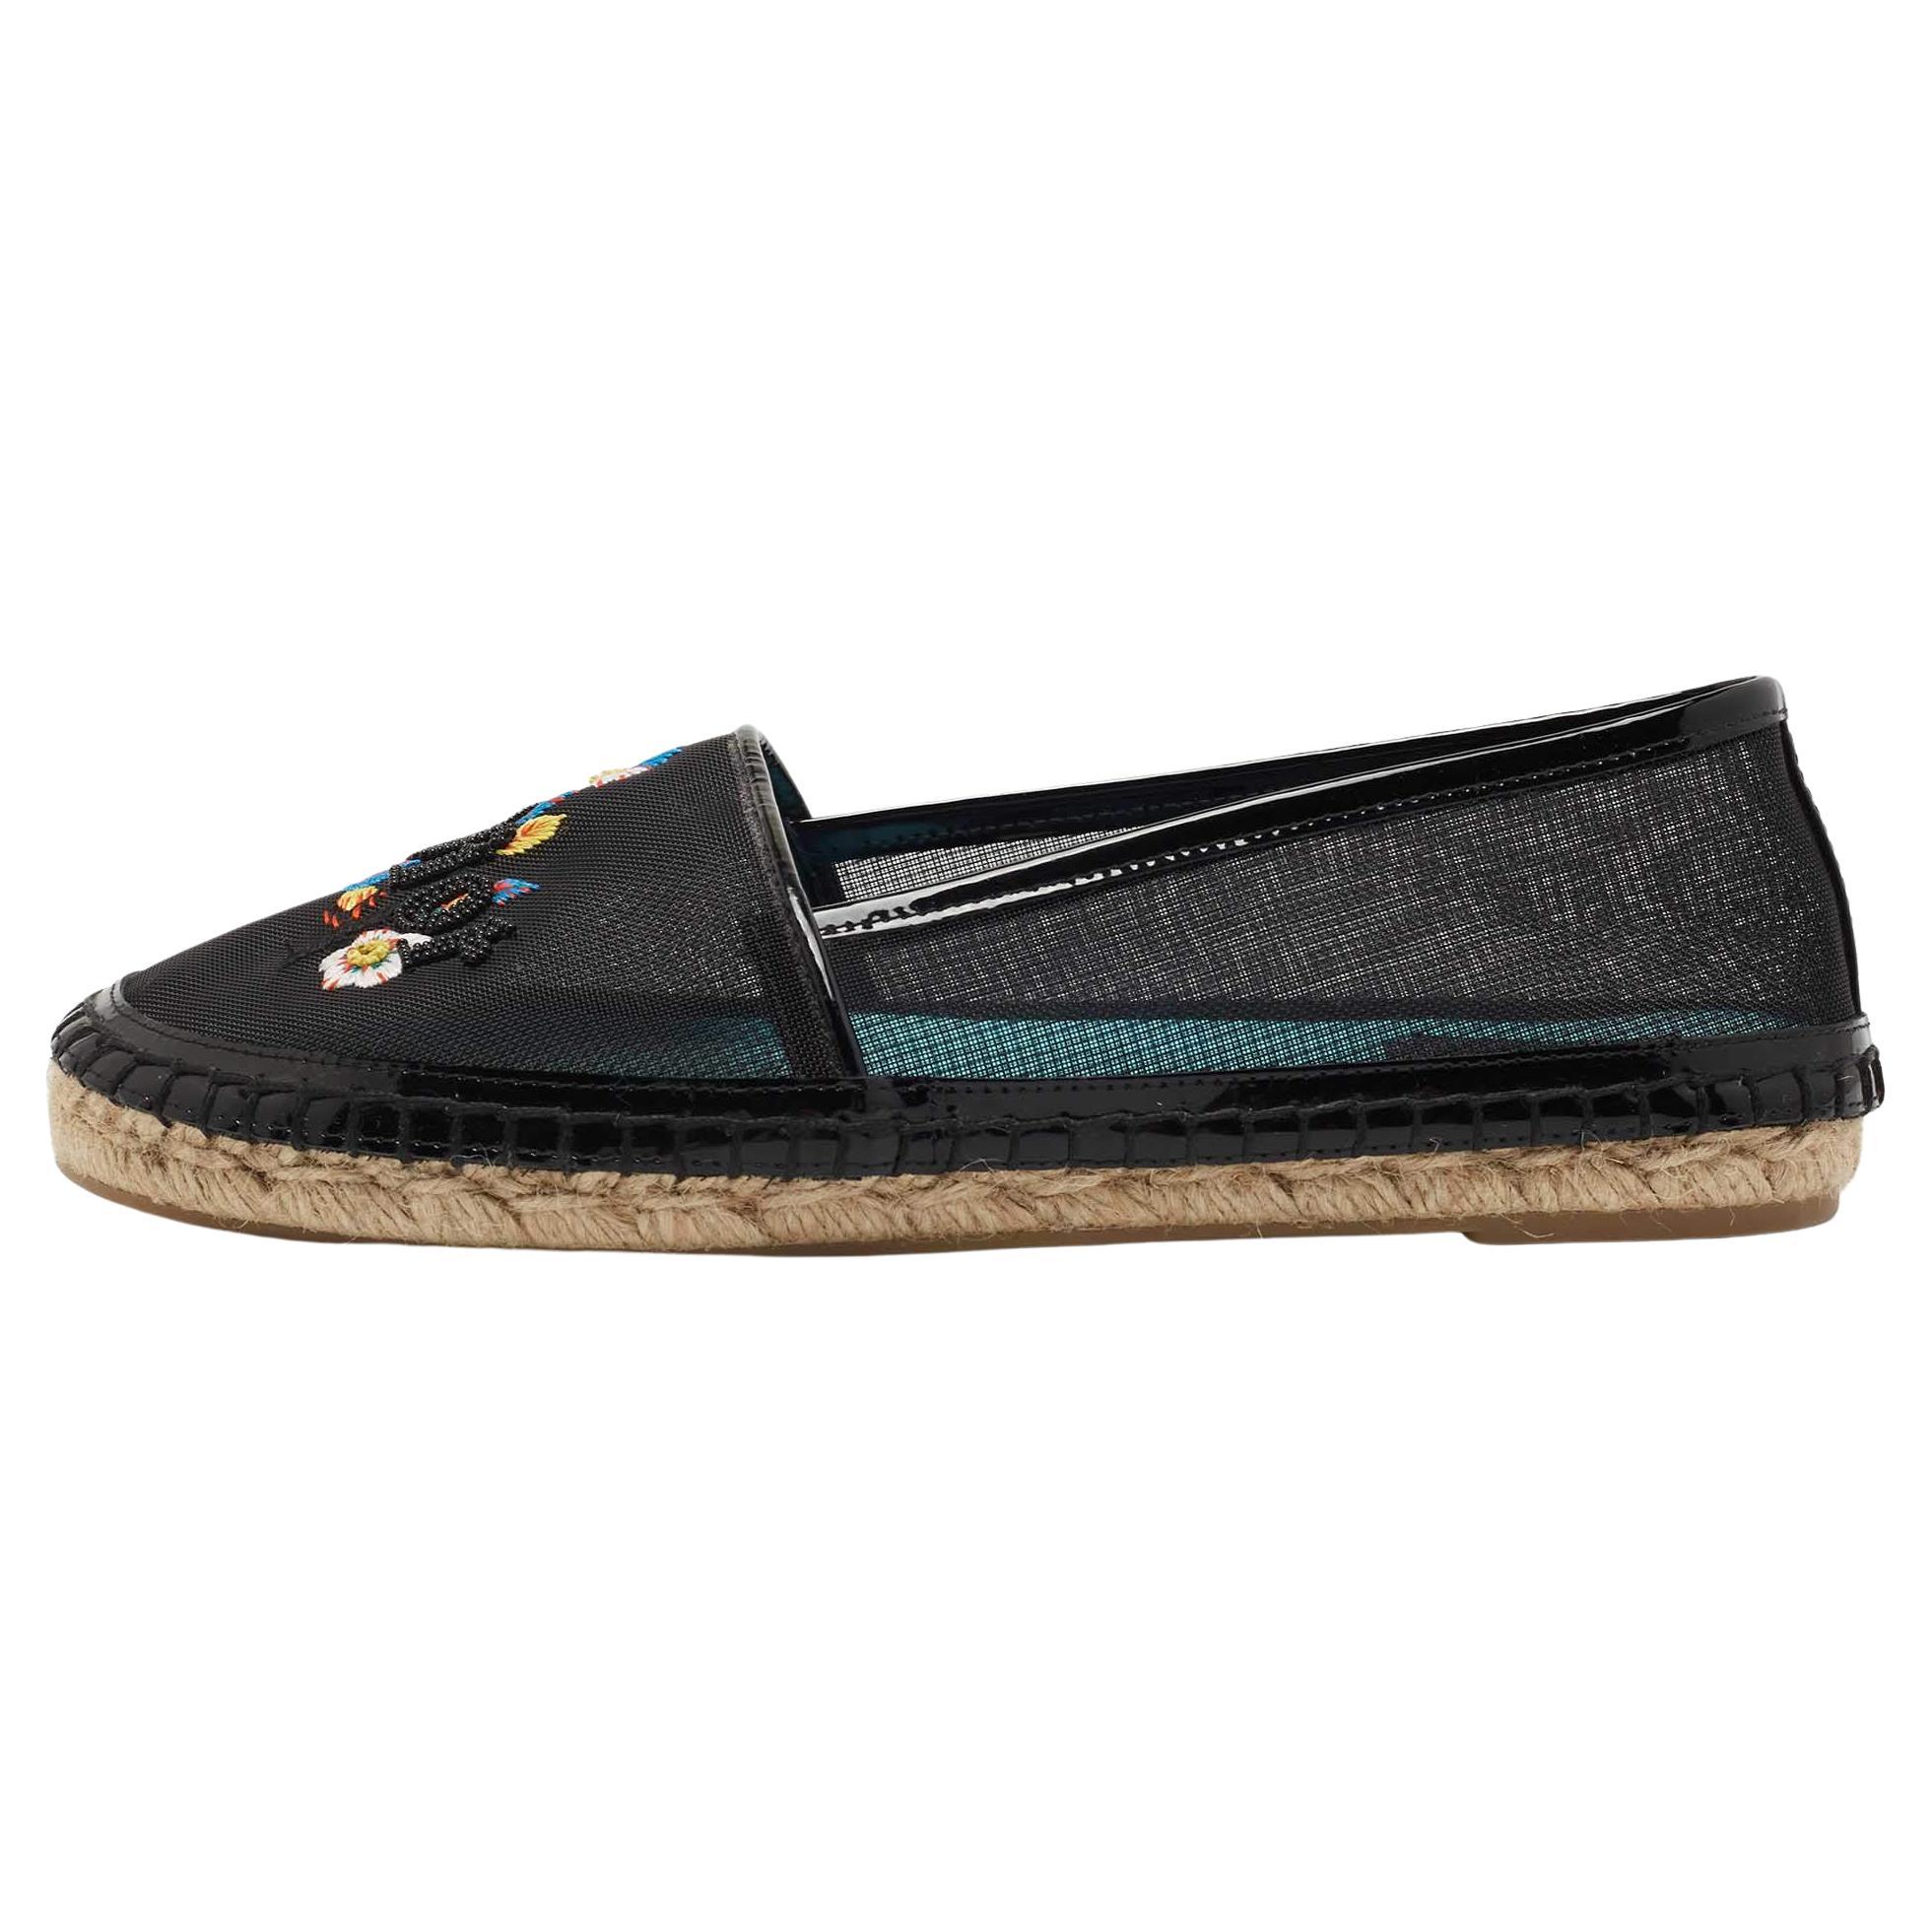 Dior Black Mesh and Patent Riviera Embroidered Espadrille Flats Size 36